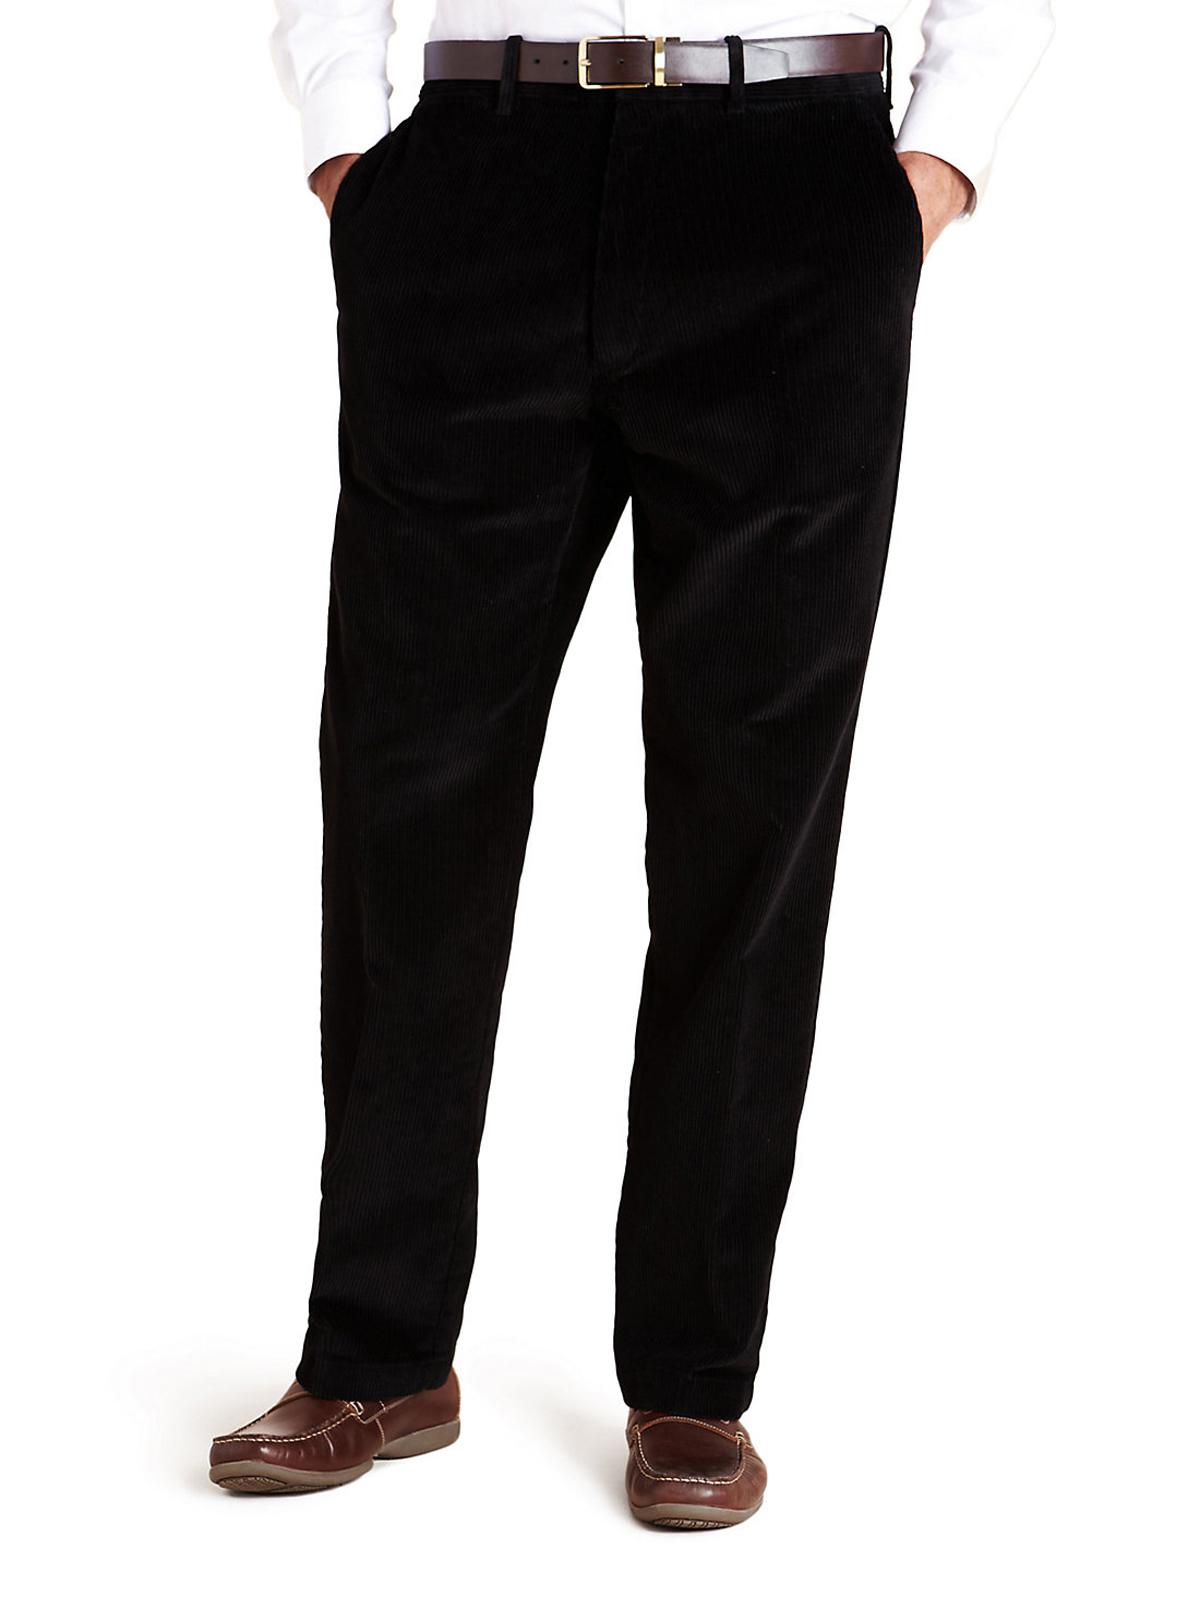 Marks and Spencer - - M&5 ASSORTED Mens Trousers - Waist Size 32 to 44 ...